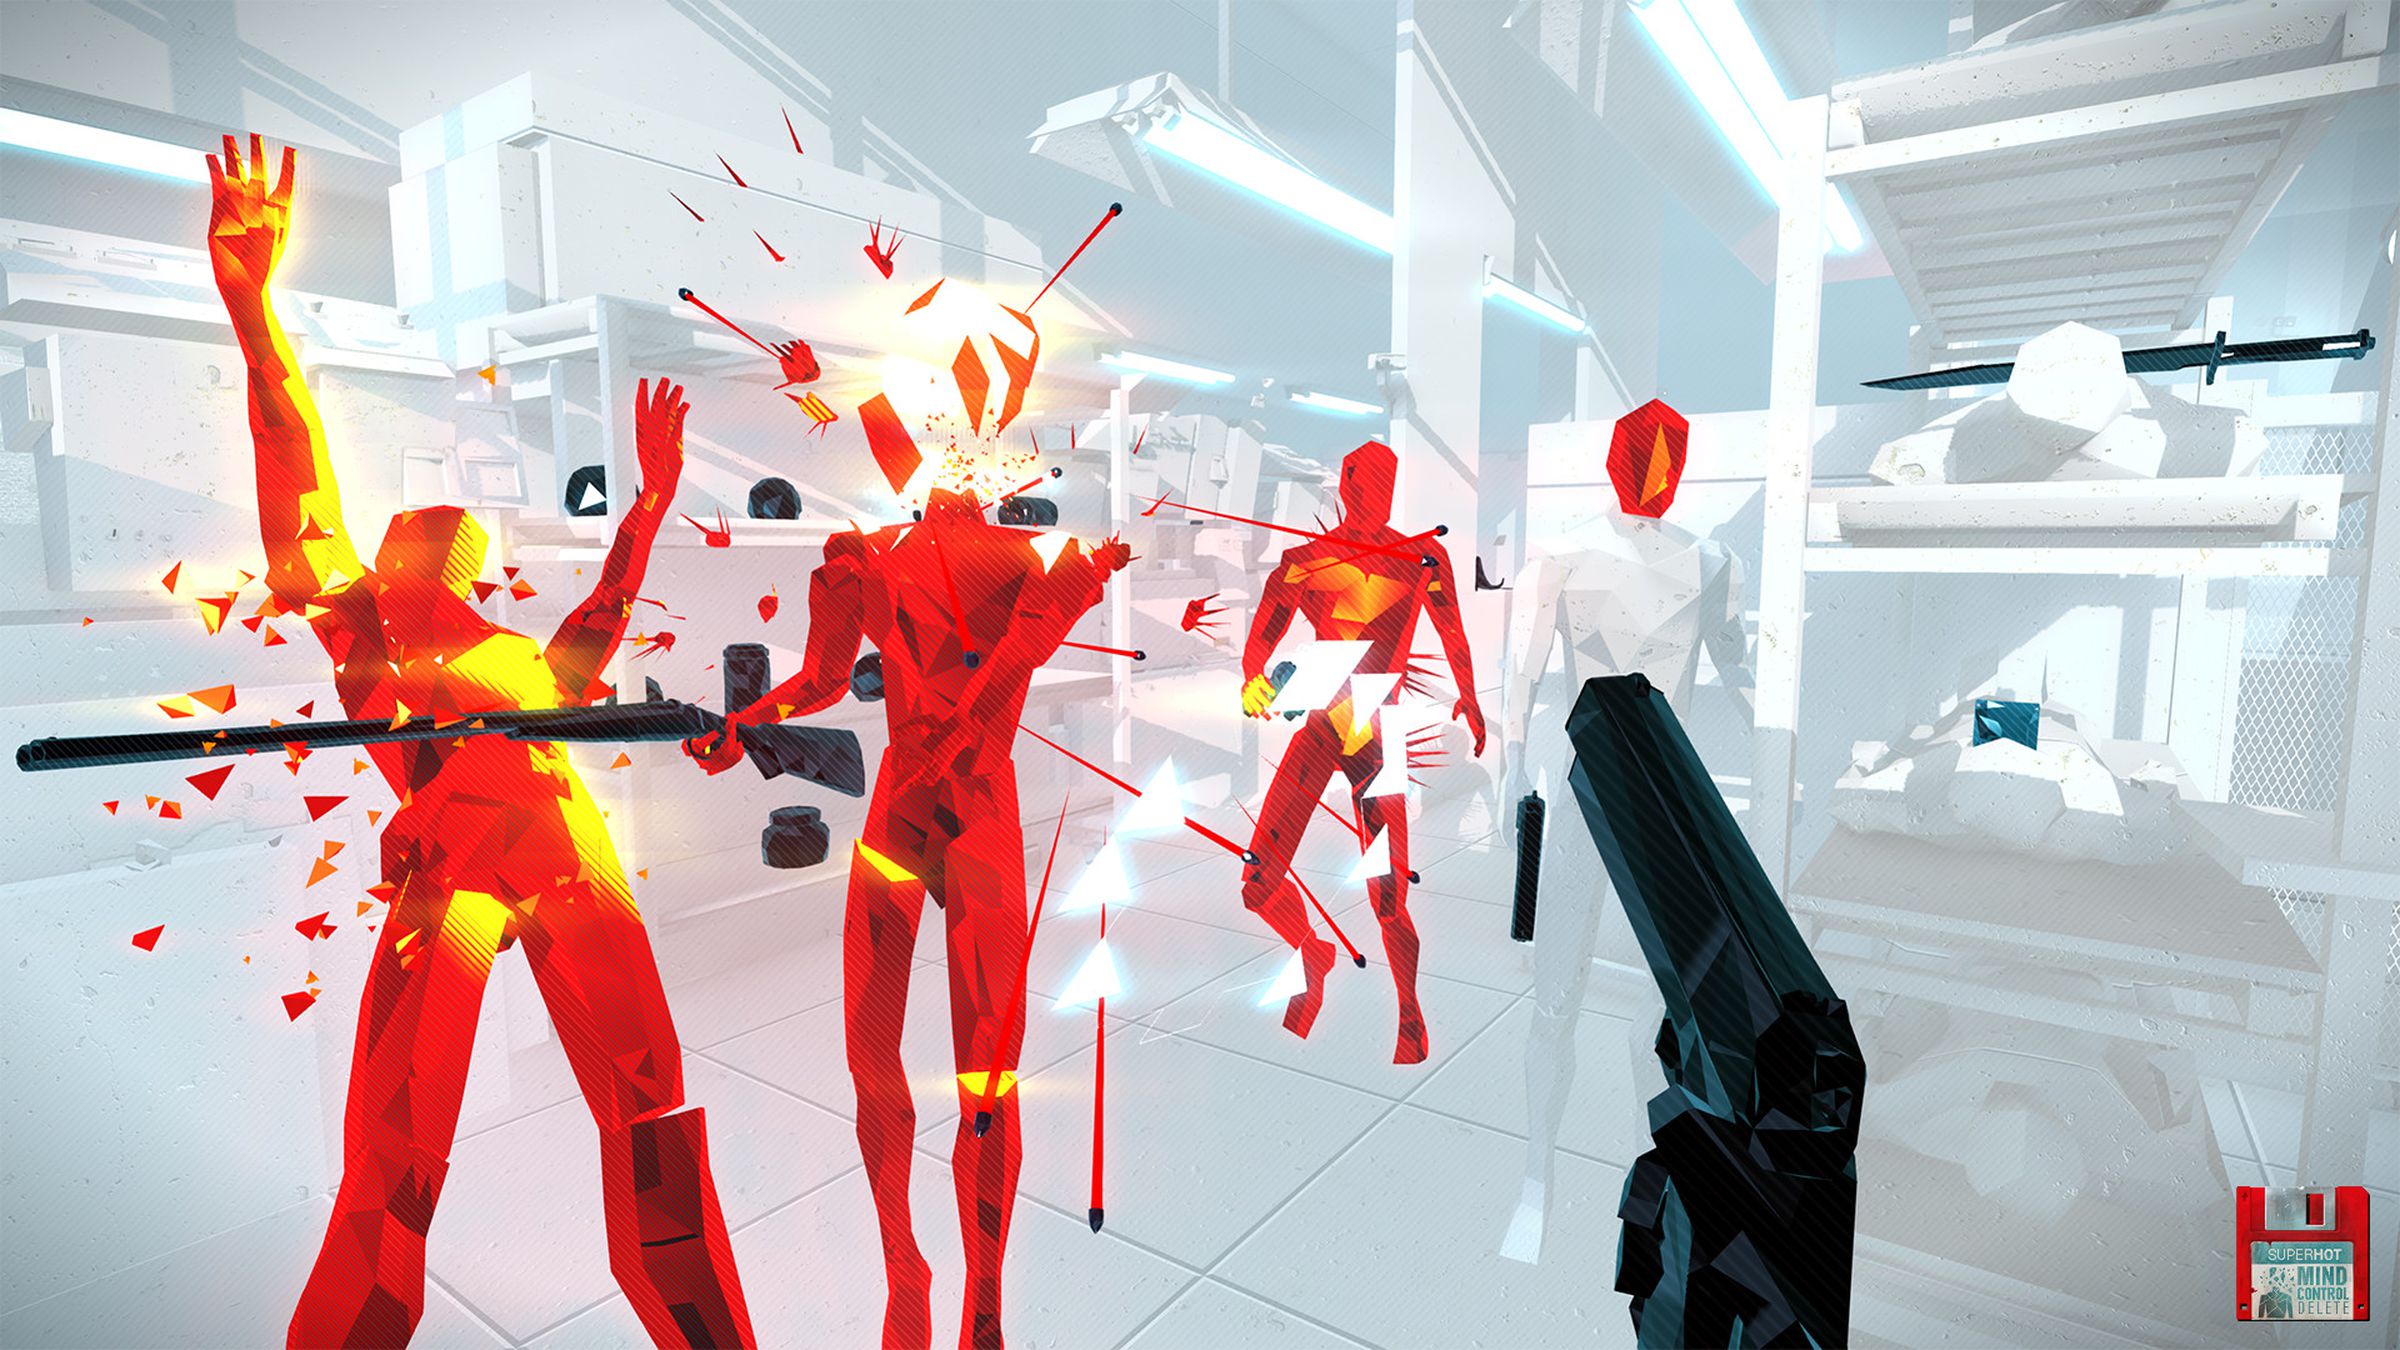 Red figures are shot and explode against a white background.